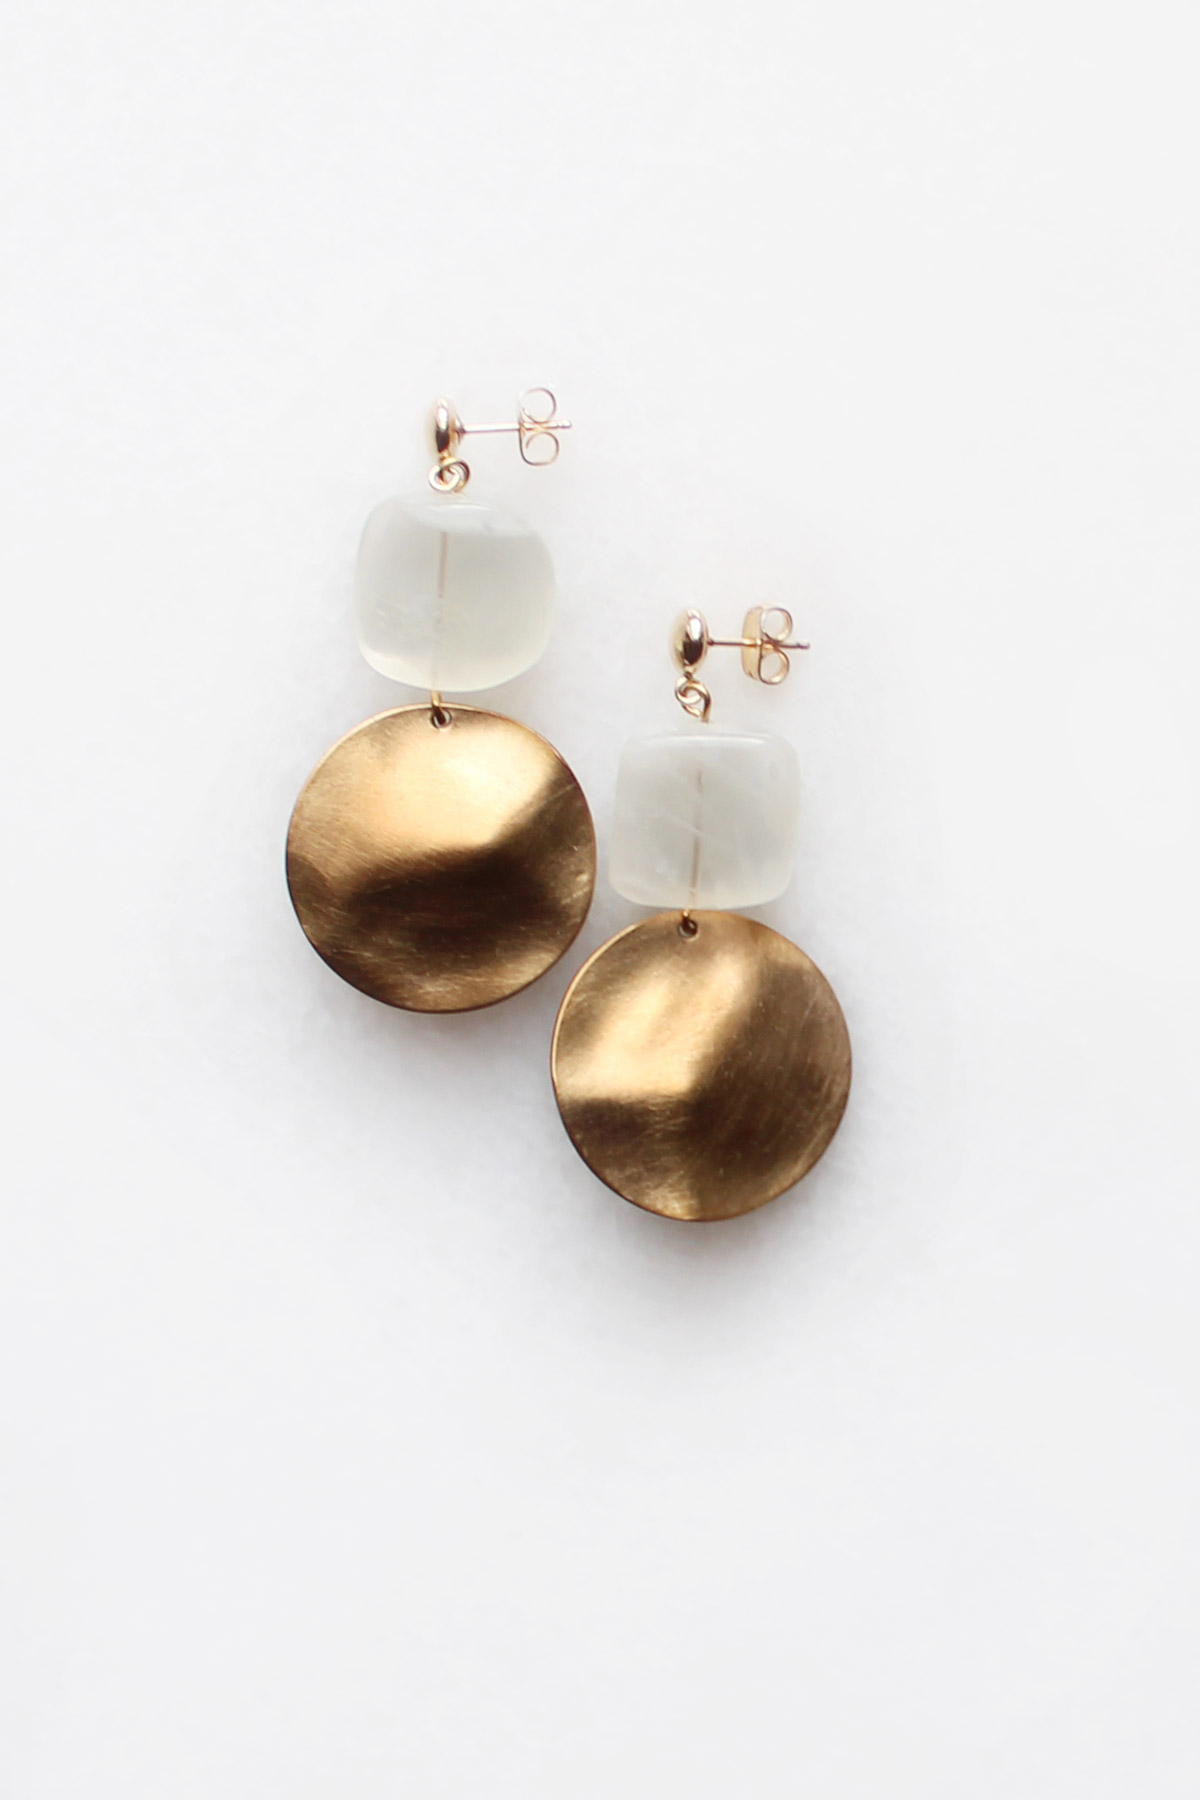 Moonstone Hammered Brass Earrings by The Vamoose